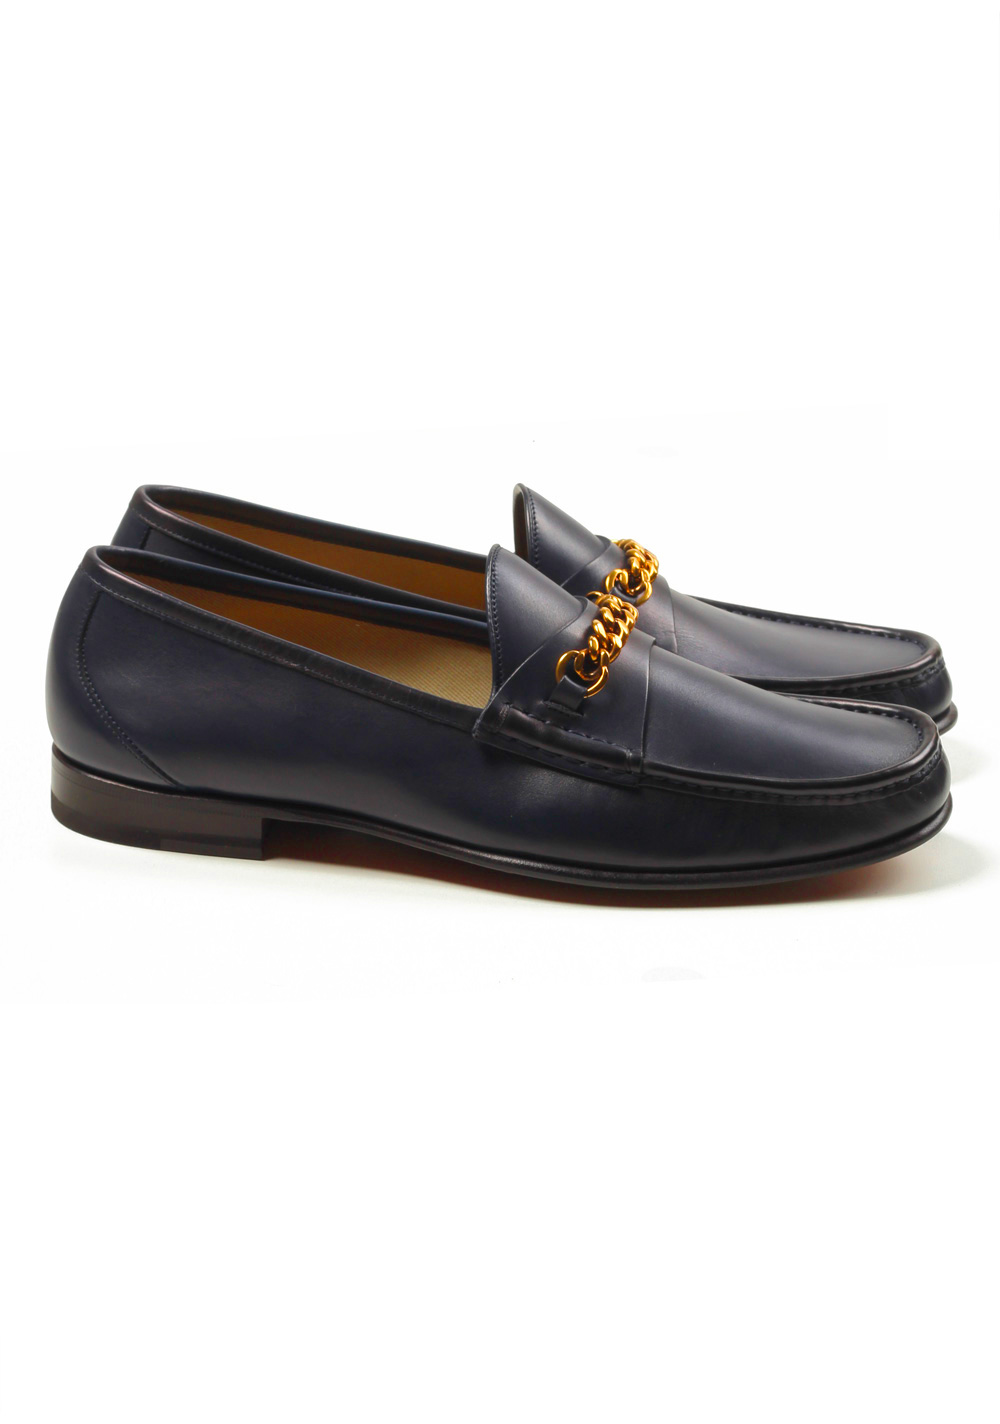 TOM FORD York Blue Leather Chain Loafers Shoes Size 8,5 UK / 9,5 U.S. | Costume Limité